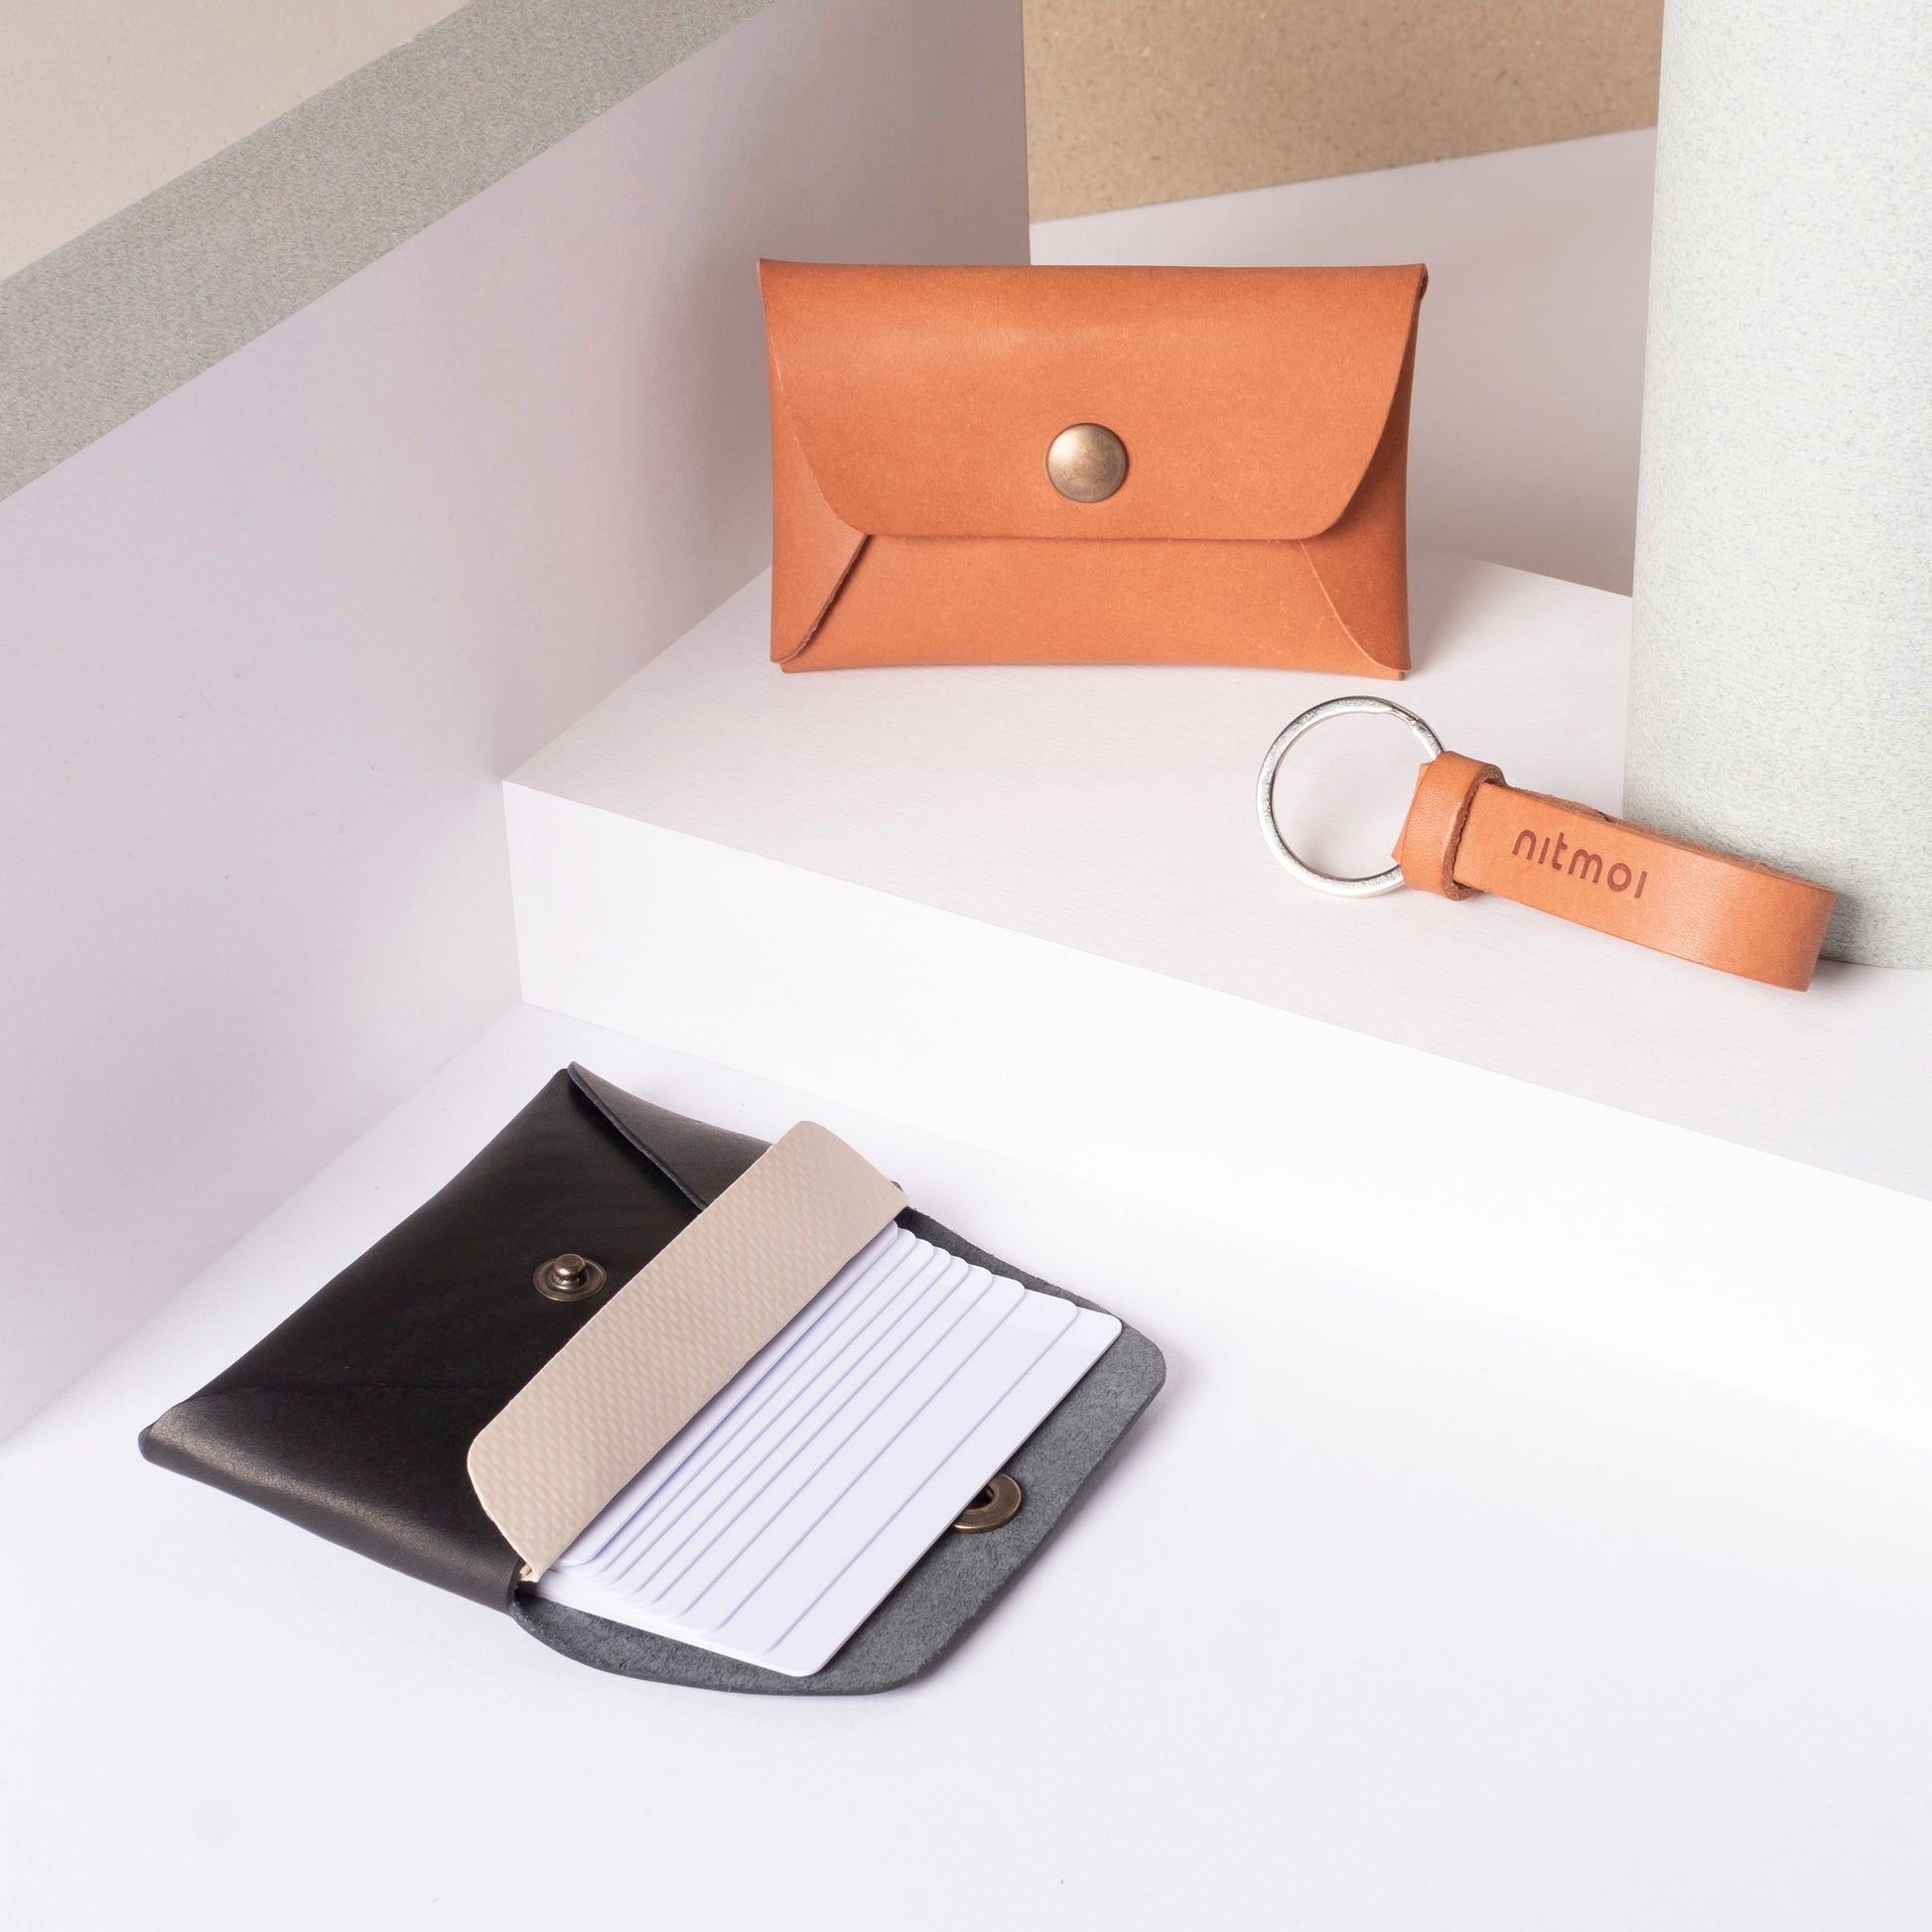 Nitmoi Minimalist Wallet - leather cardholder in cognac and black